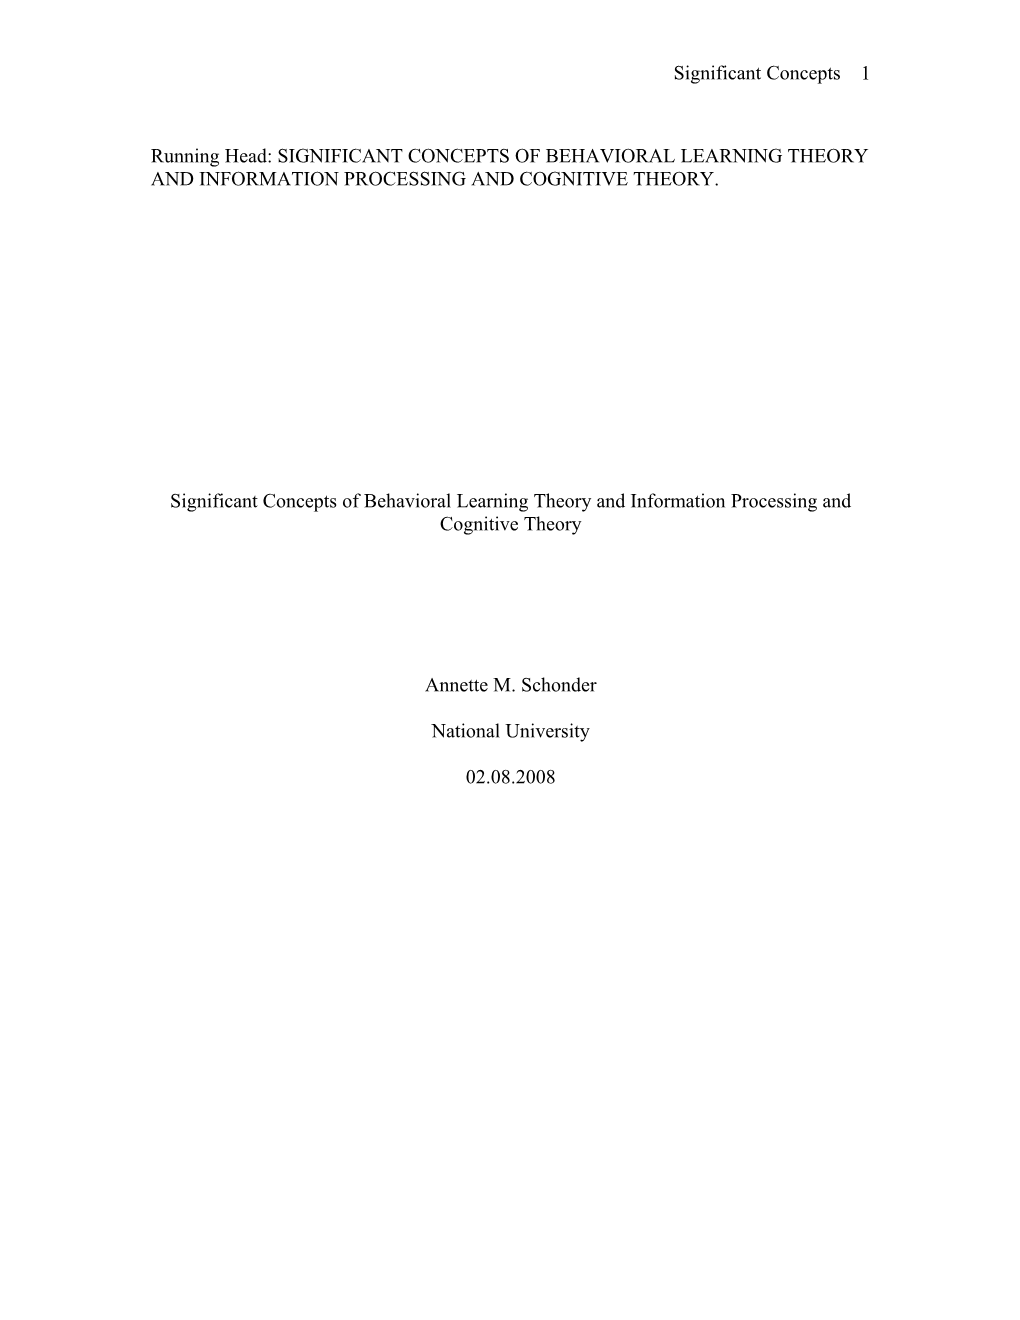 Significant Concepts of Behavioral Learning Theory and Information Processing and Cognitive